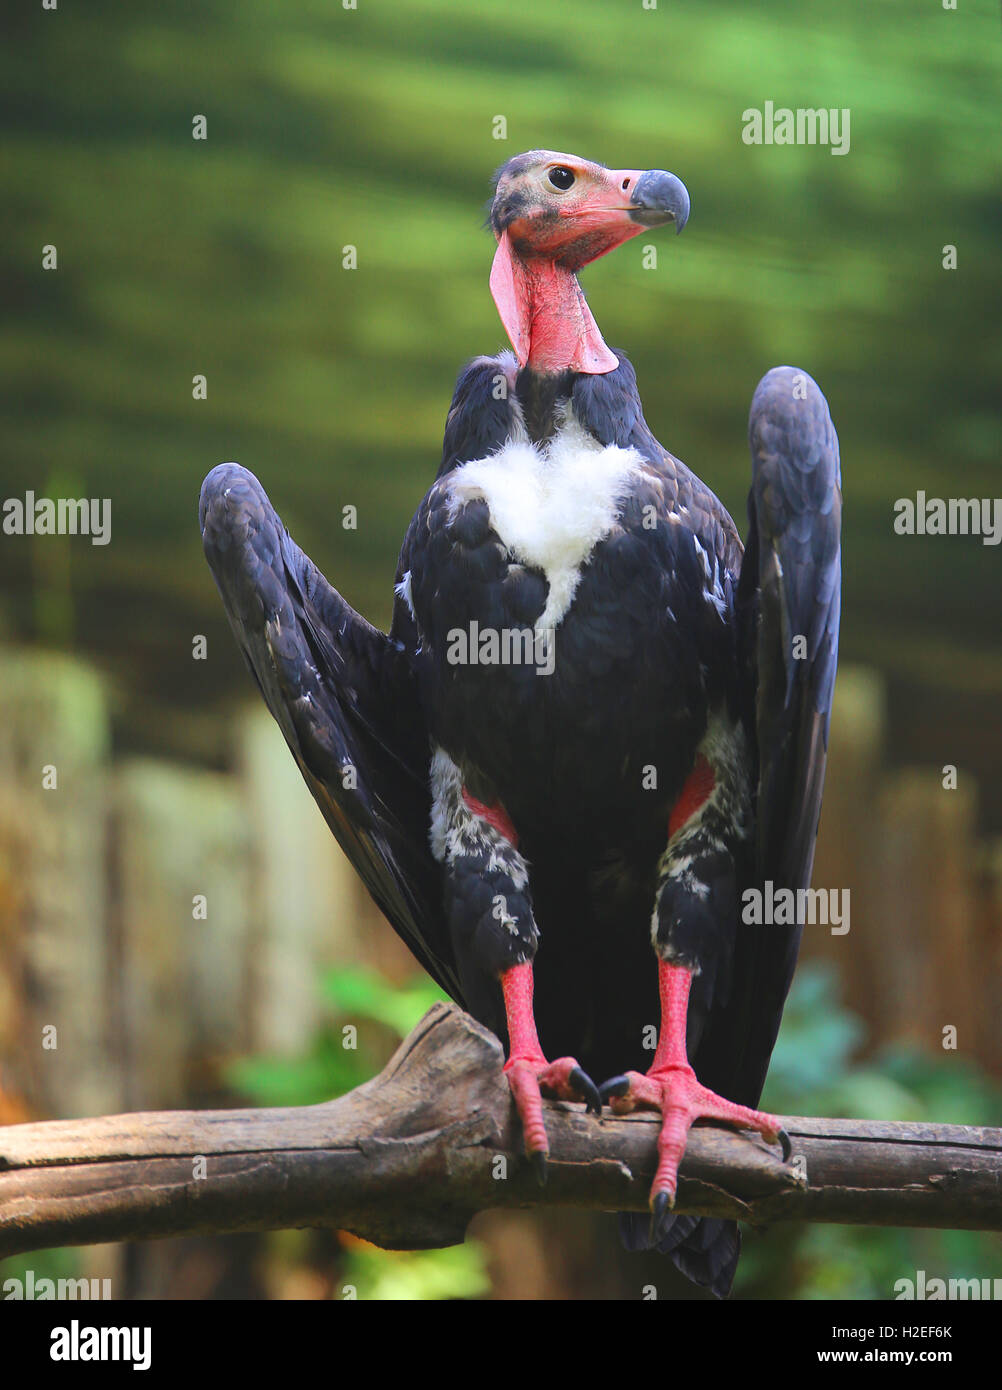 turkey vulture with long neck and dark plumage on branch waiting for prey Stock Photo